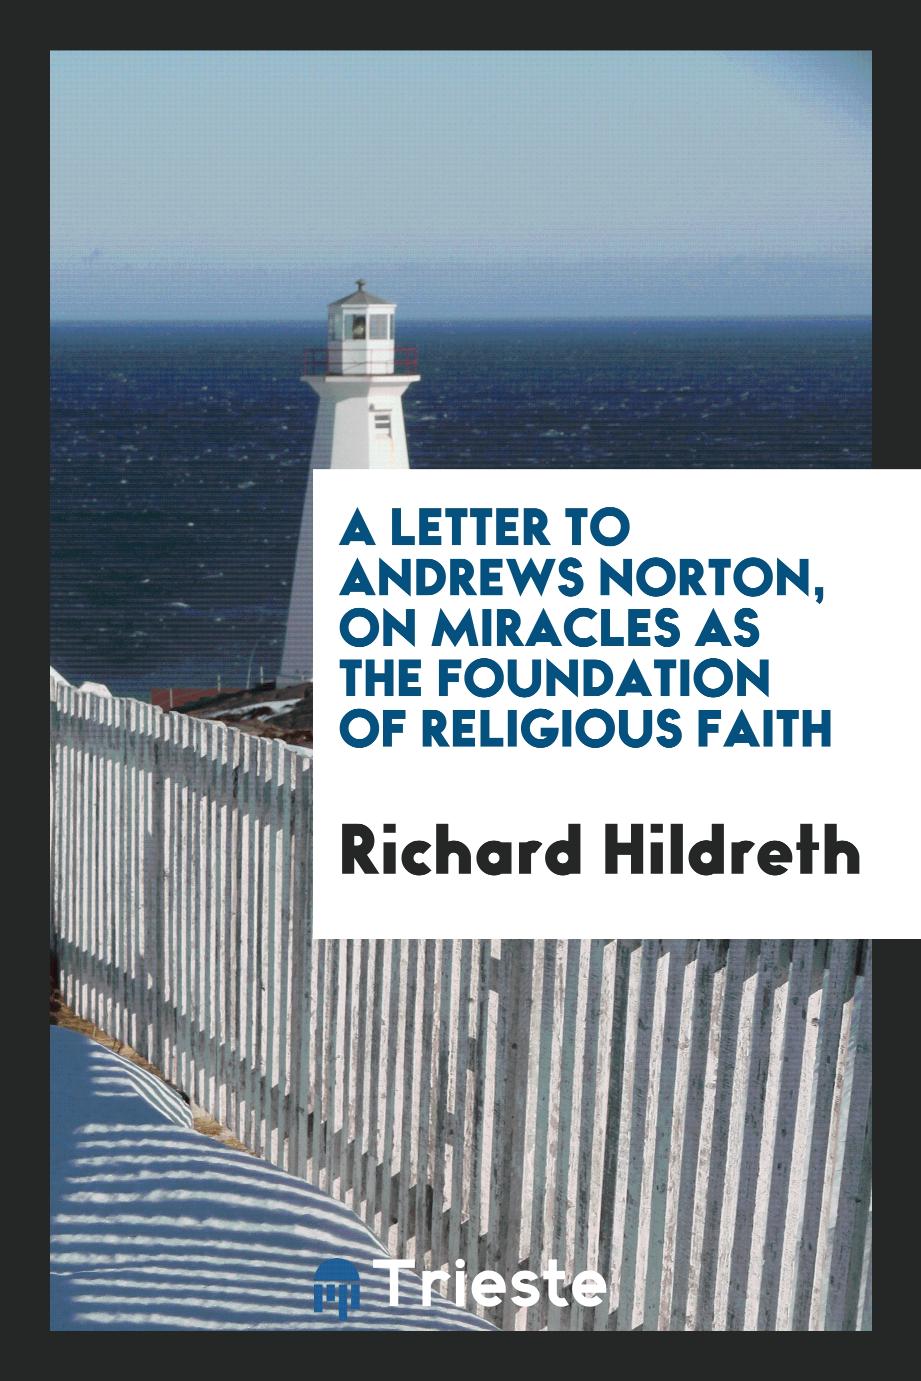 A Letter to Andrews Norton, on Miracles as the Foundation of Religious Faith